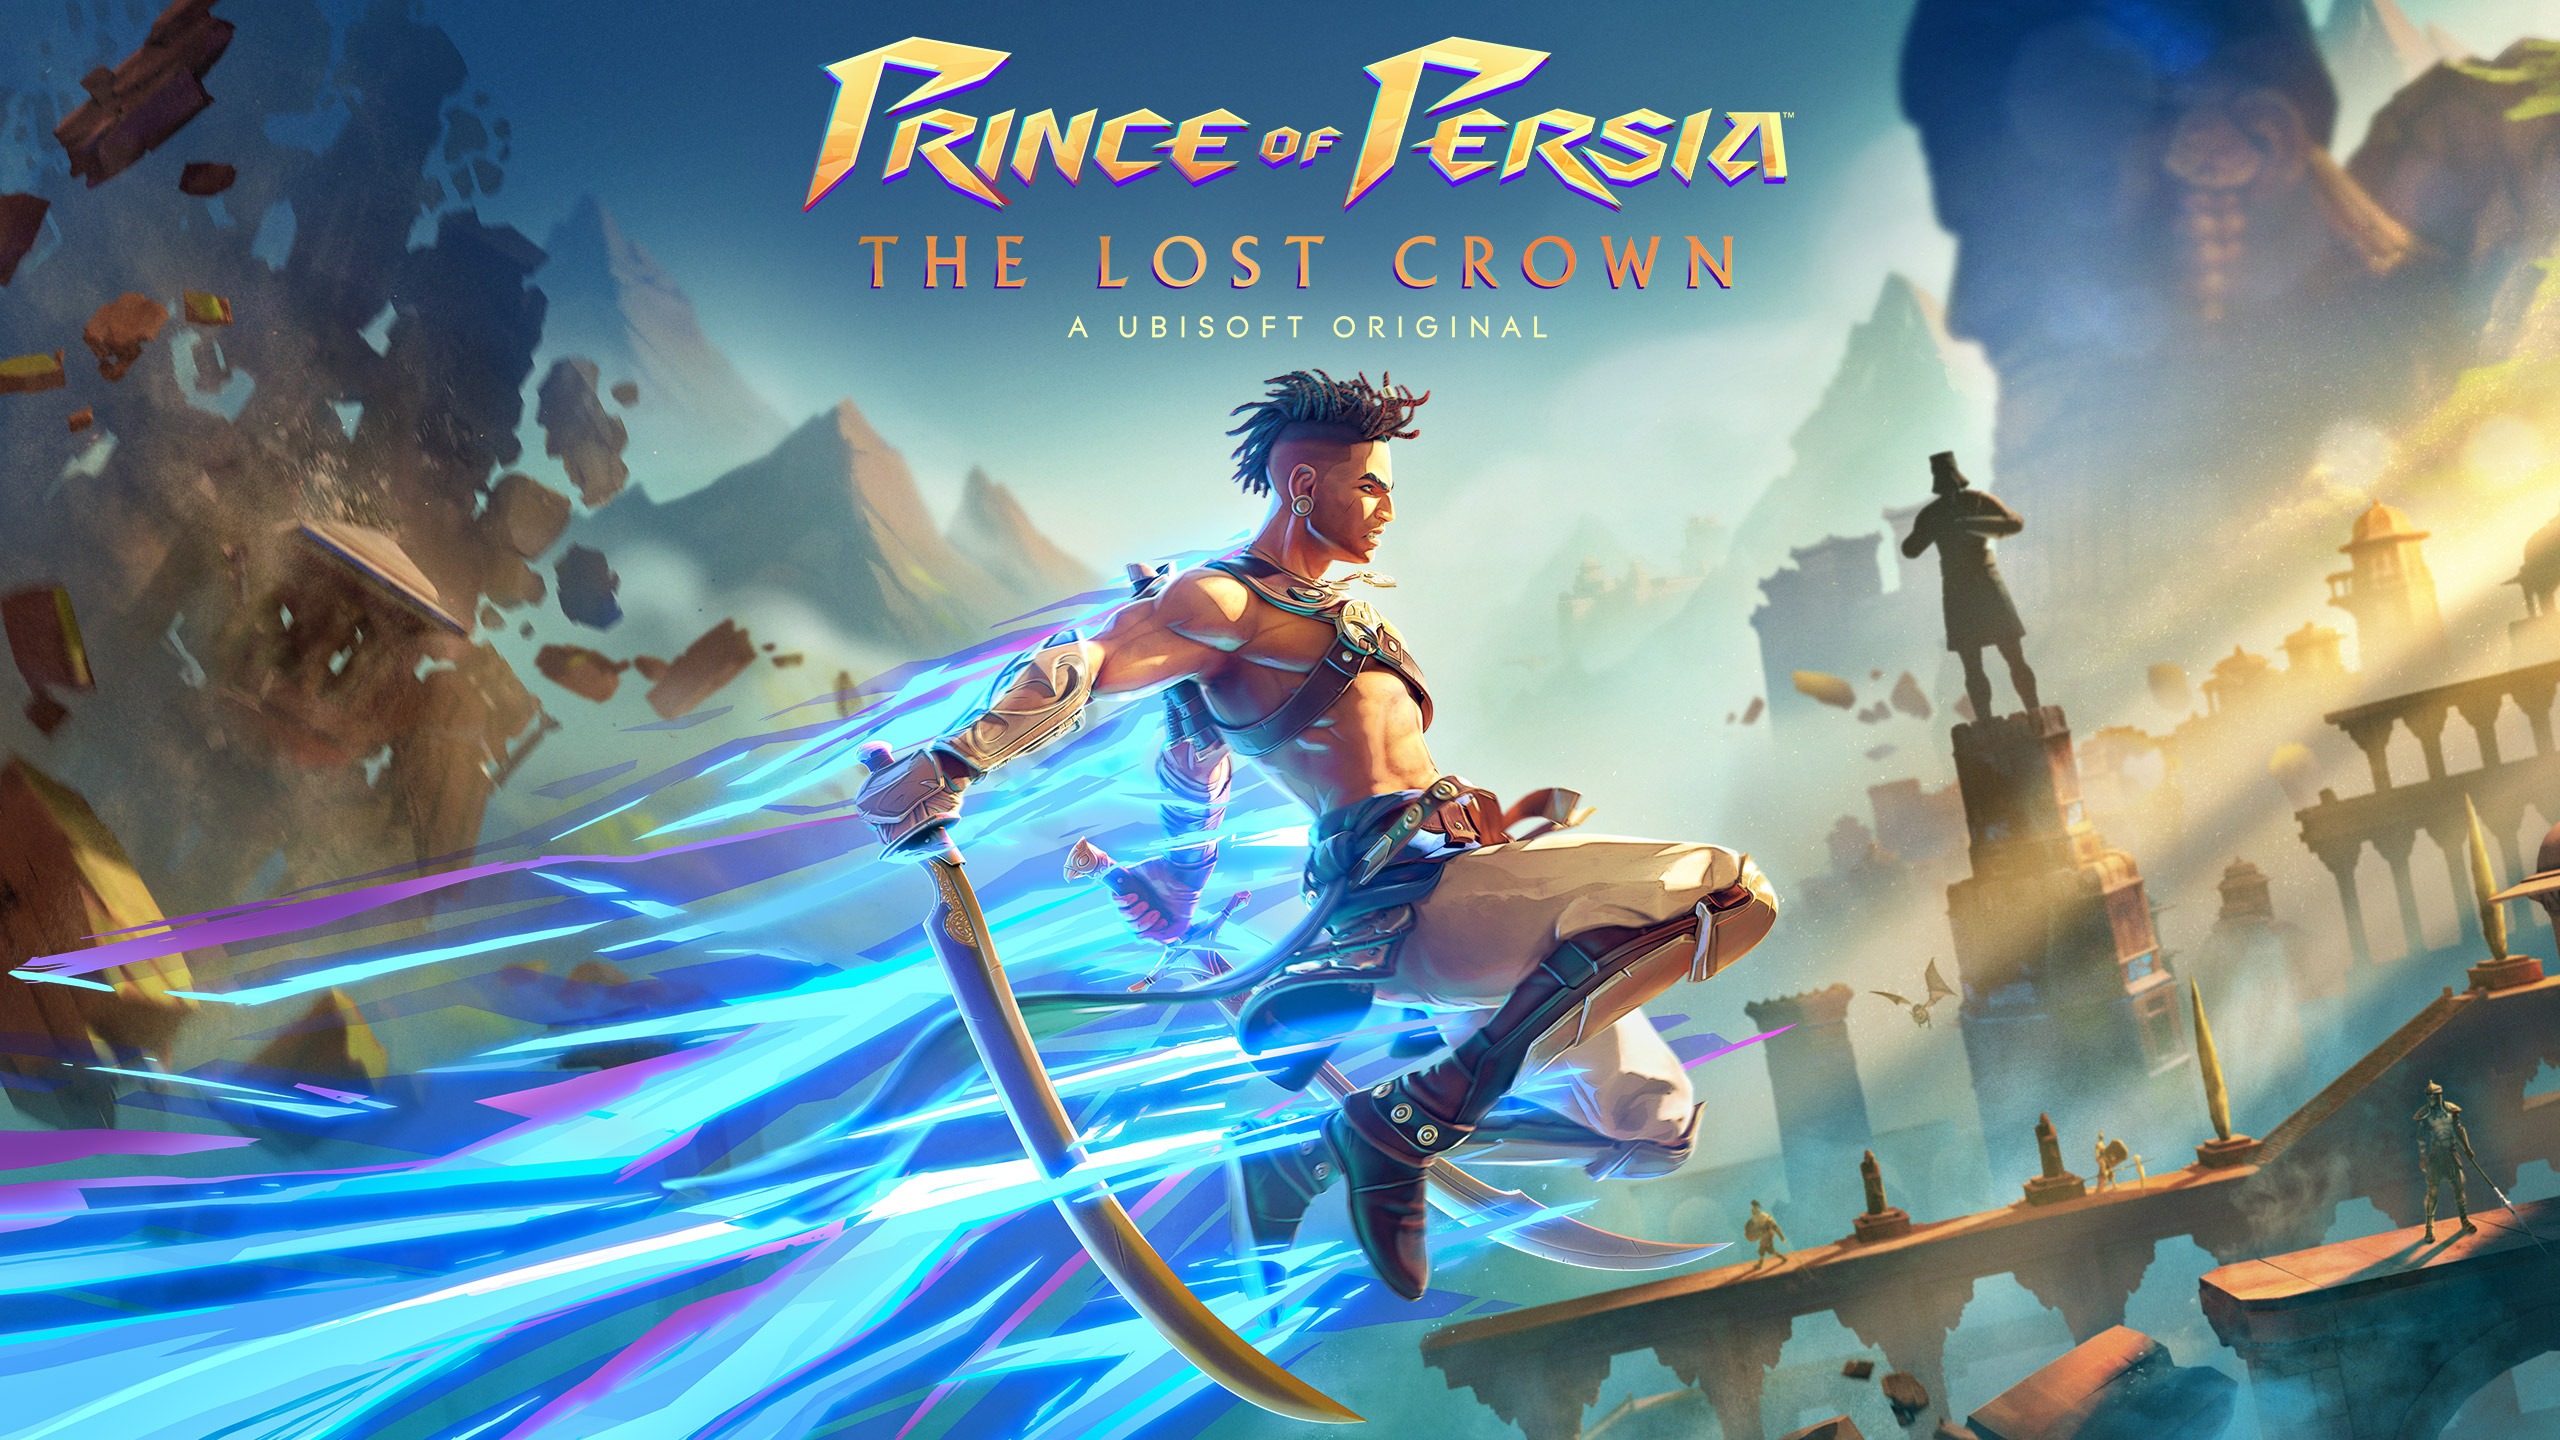 Paris Games Week 2023 : on a testé "Prince of Persia : The Lost Crown" !